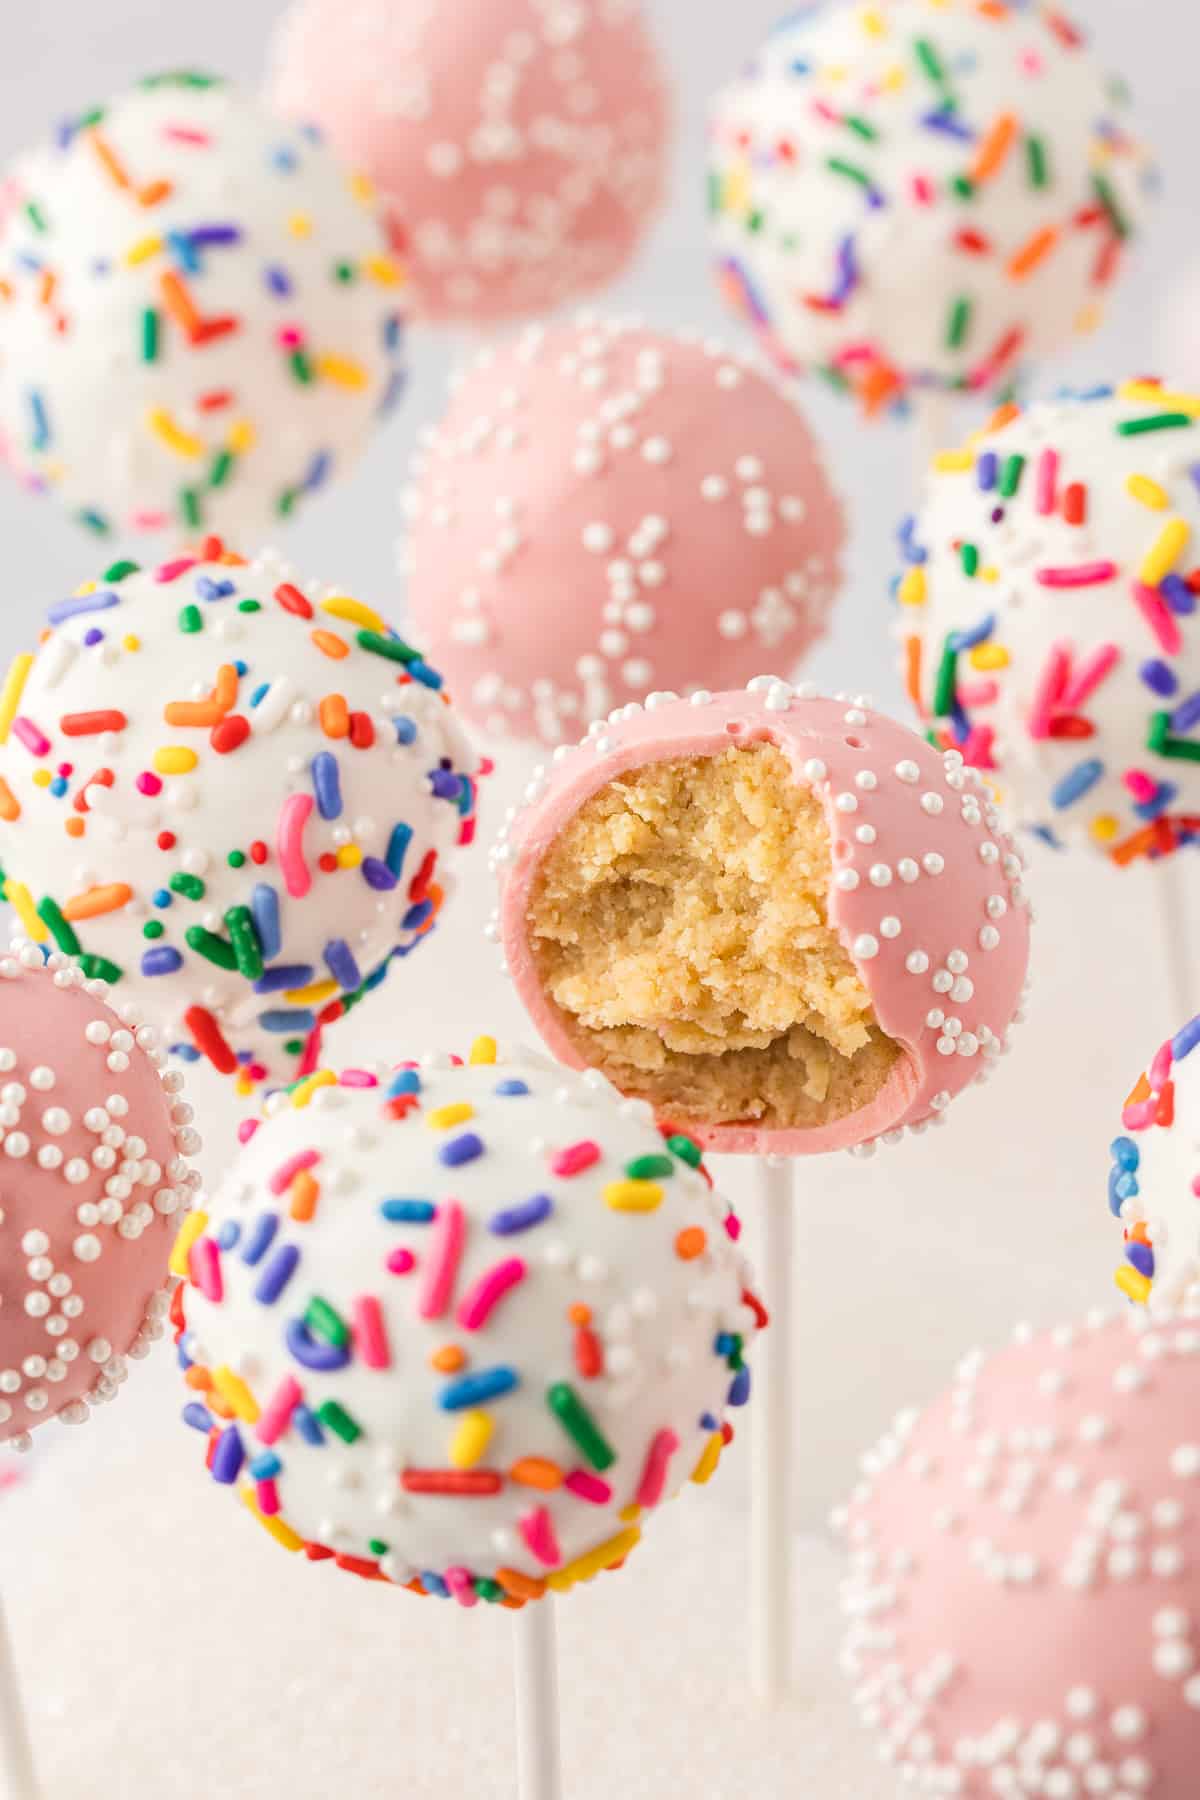 cake pops standing straight up set in a white styrofoam block, some pink with white sprinkles and some white with rainbow sprinkles, with one pink one missing a bite out